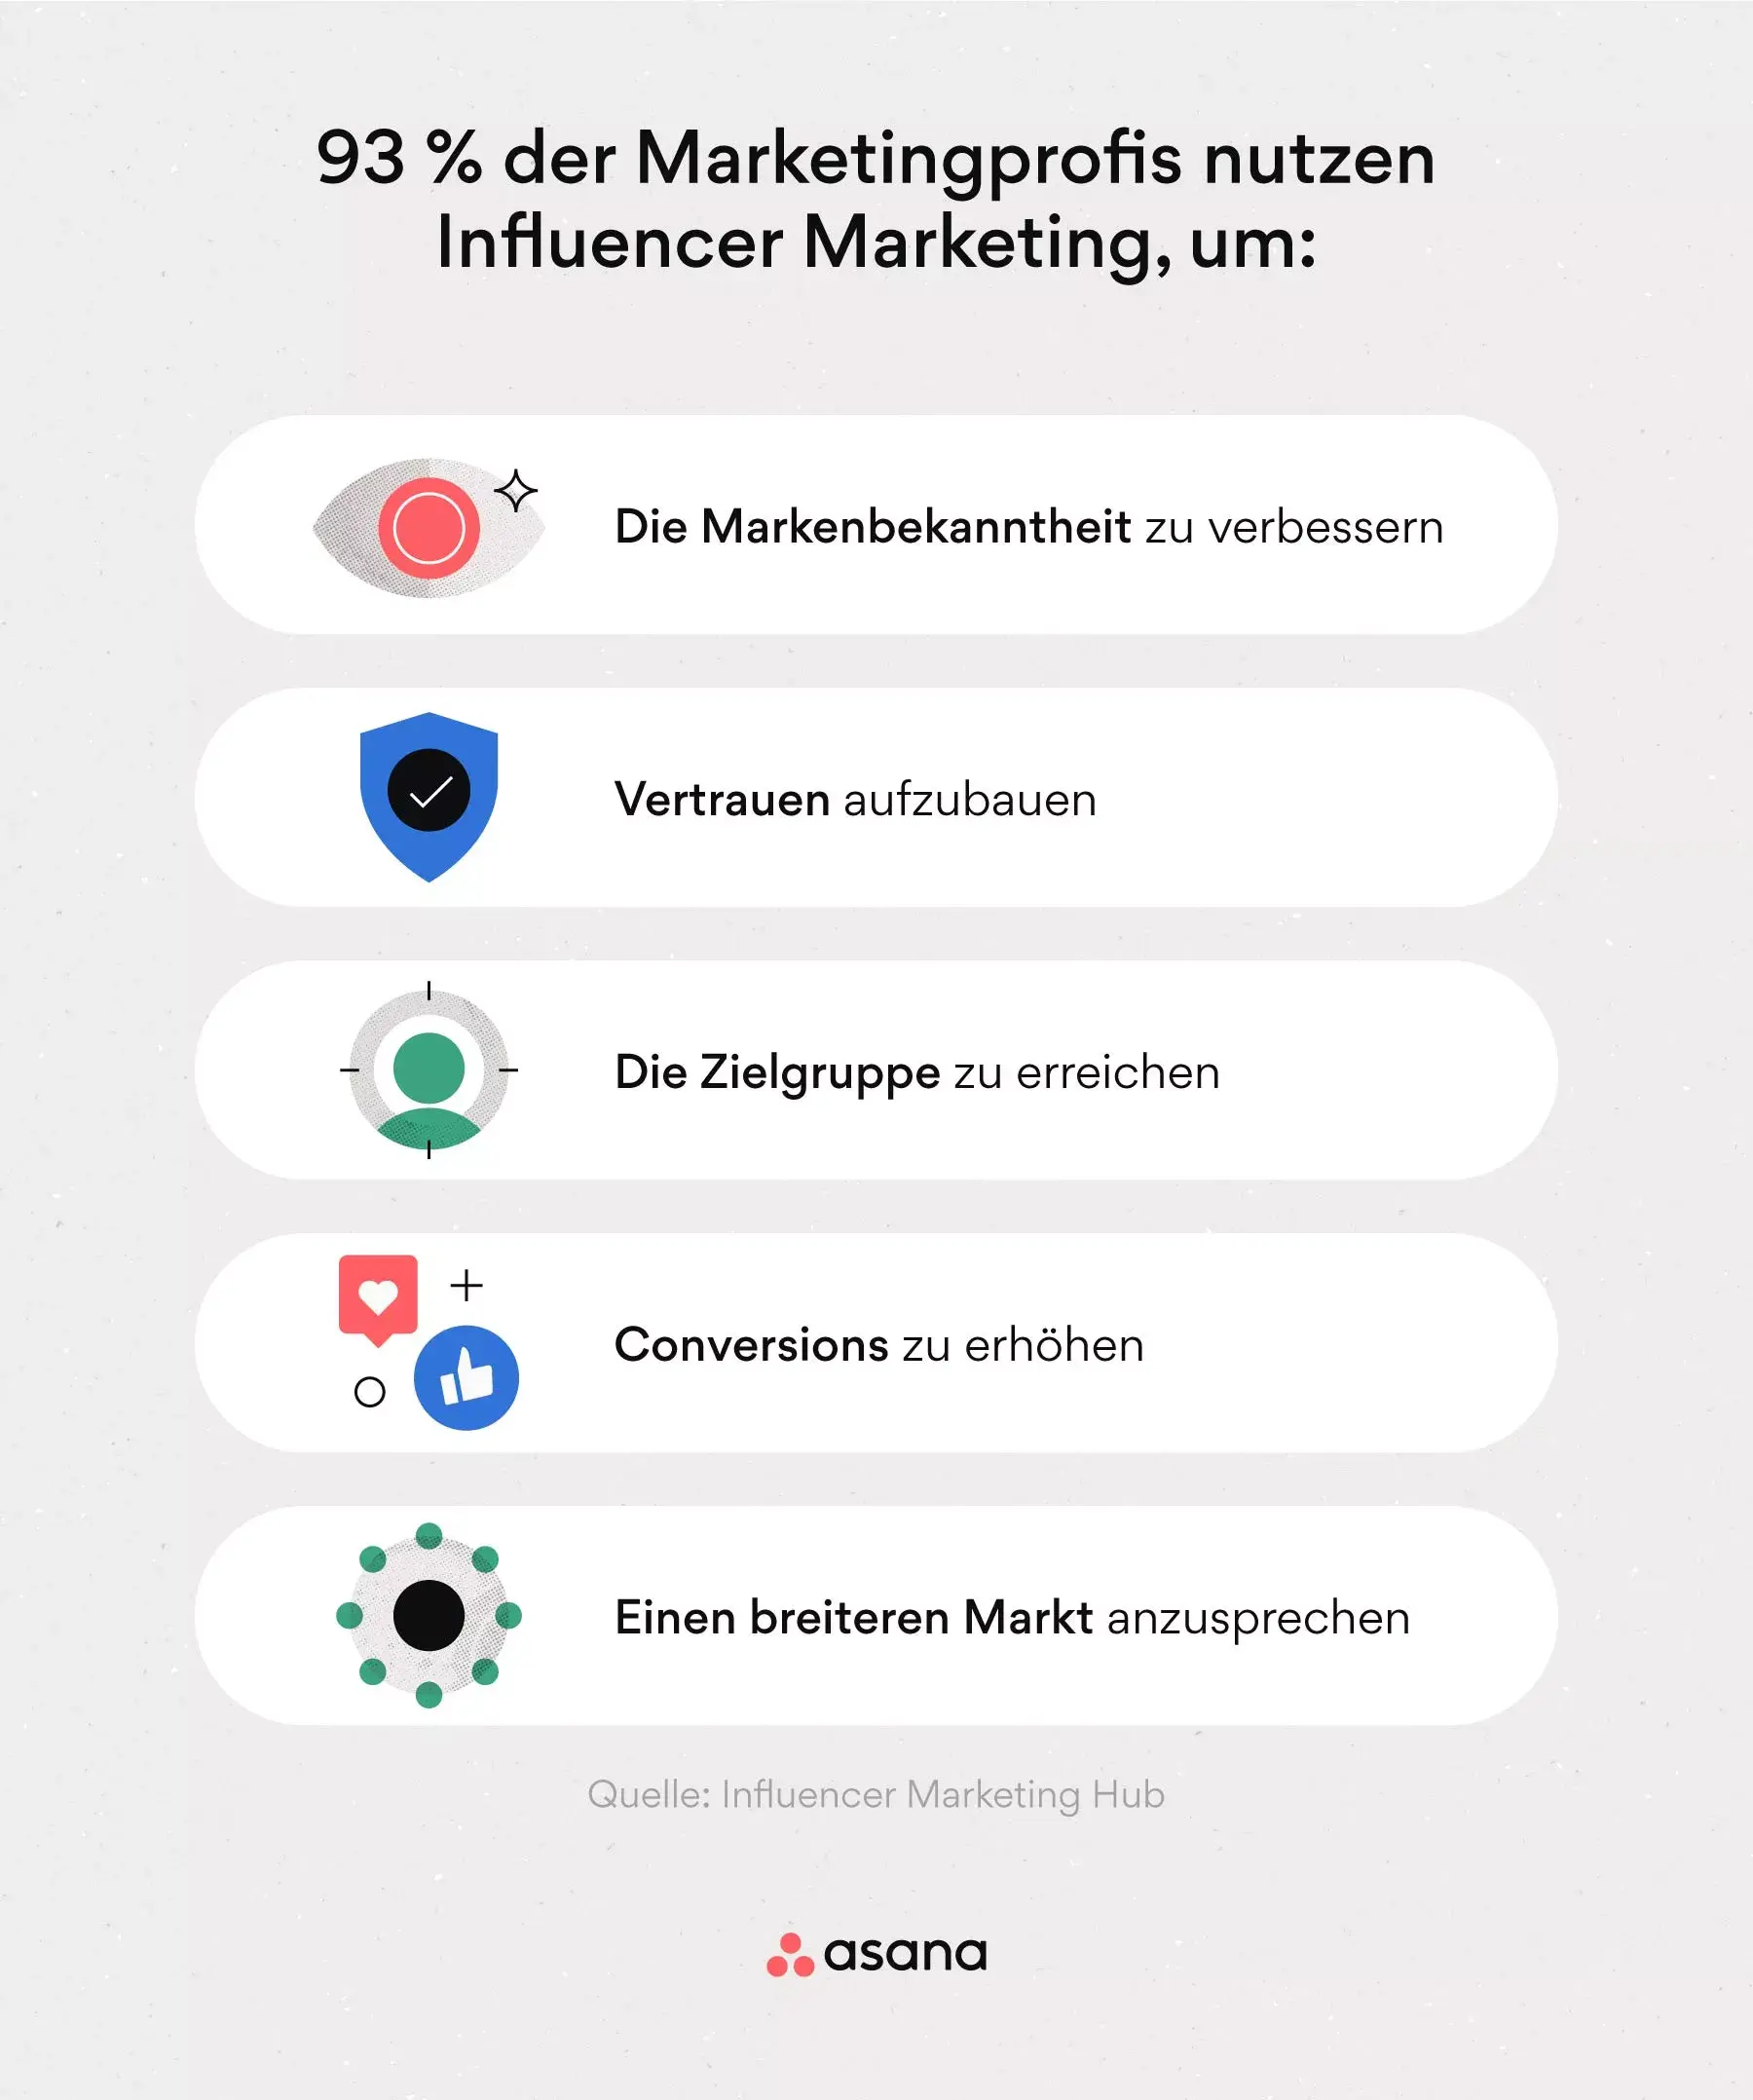 [Inline illustration] How marketing professionals think about influencer marketing (Infographic)